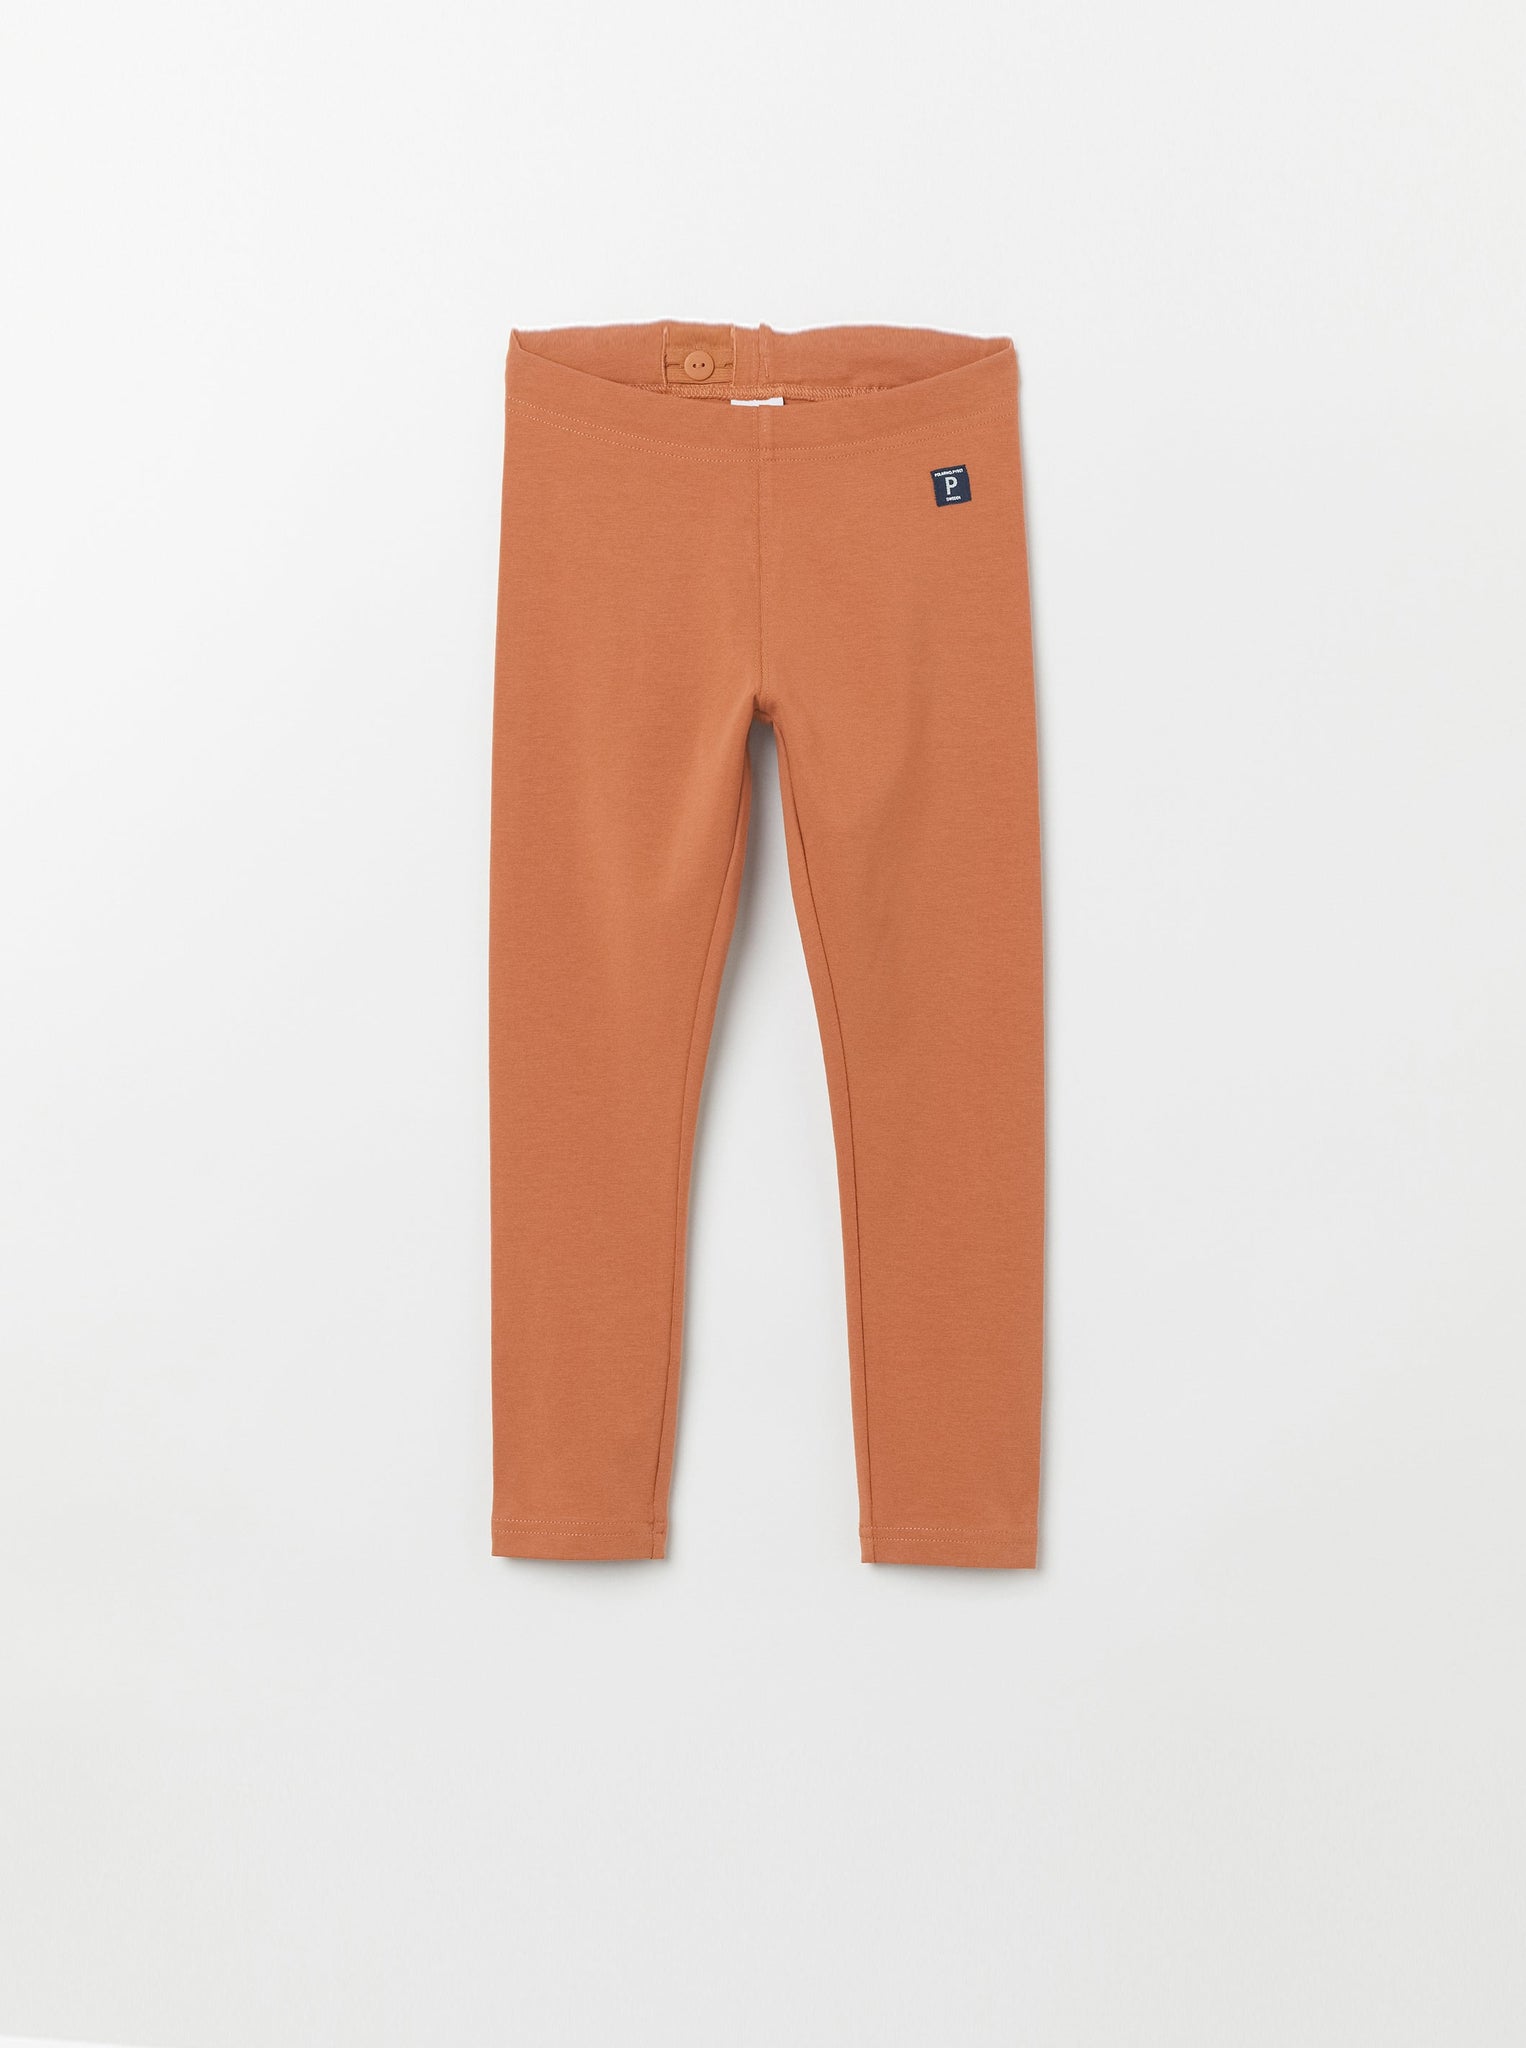 Organic Cotton Orange Kids Leggings from the Polarn O. Pyret Kidswear collection. Nordic kids clothes made from sustainable sources.